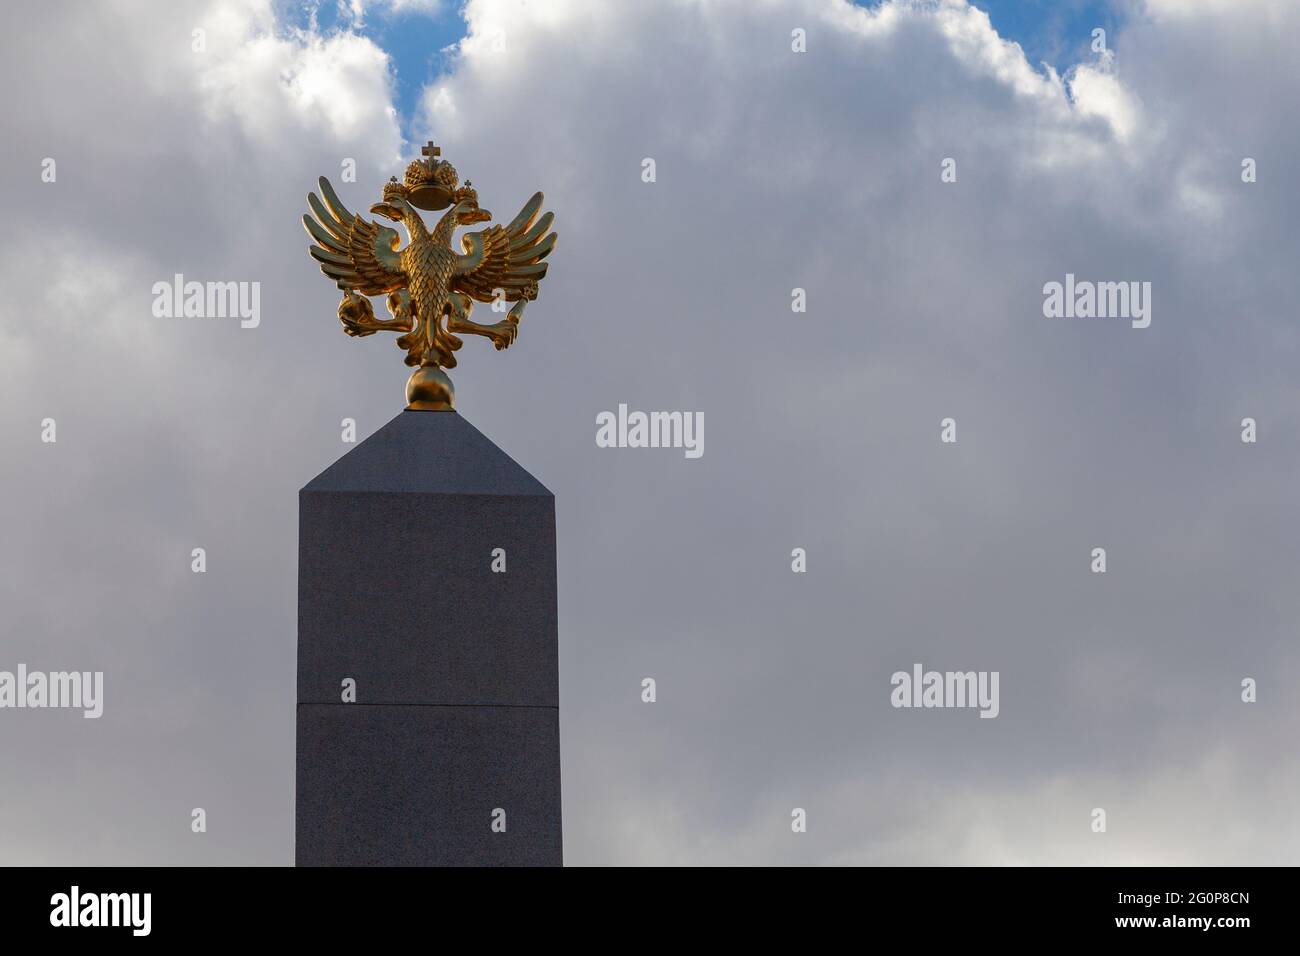 Coat of arms of Russia golden double-headed eagle at the top of the granite pyramid. Stock Photo